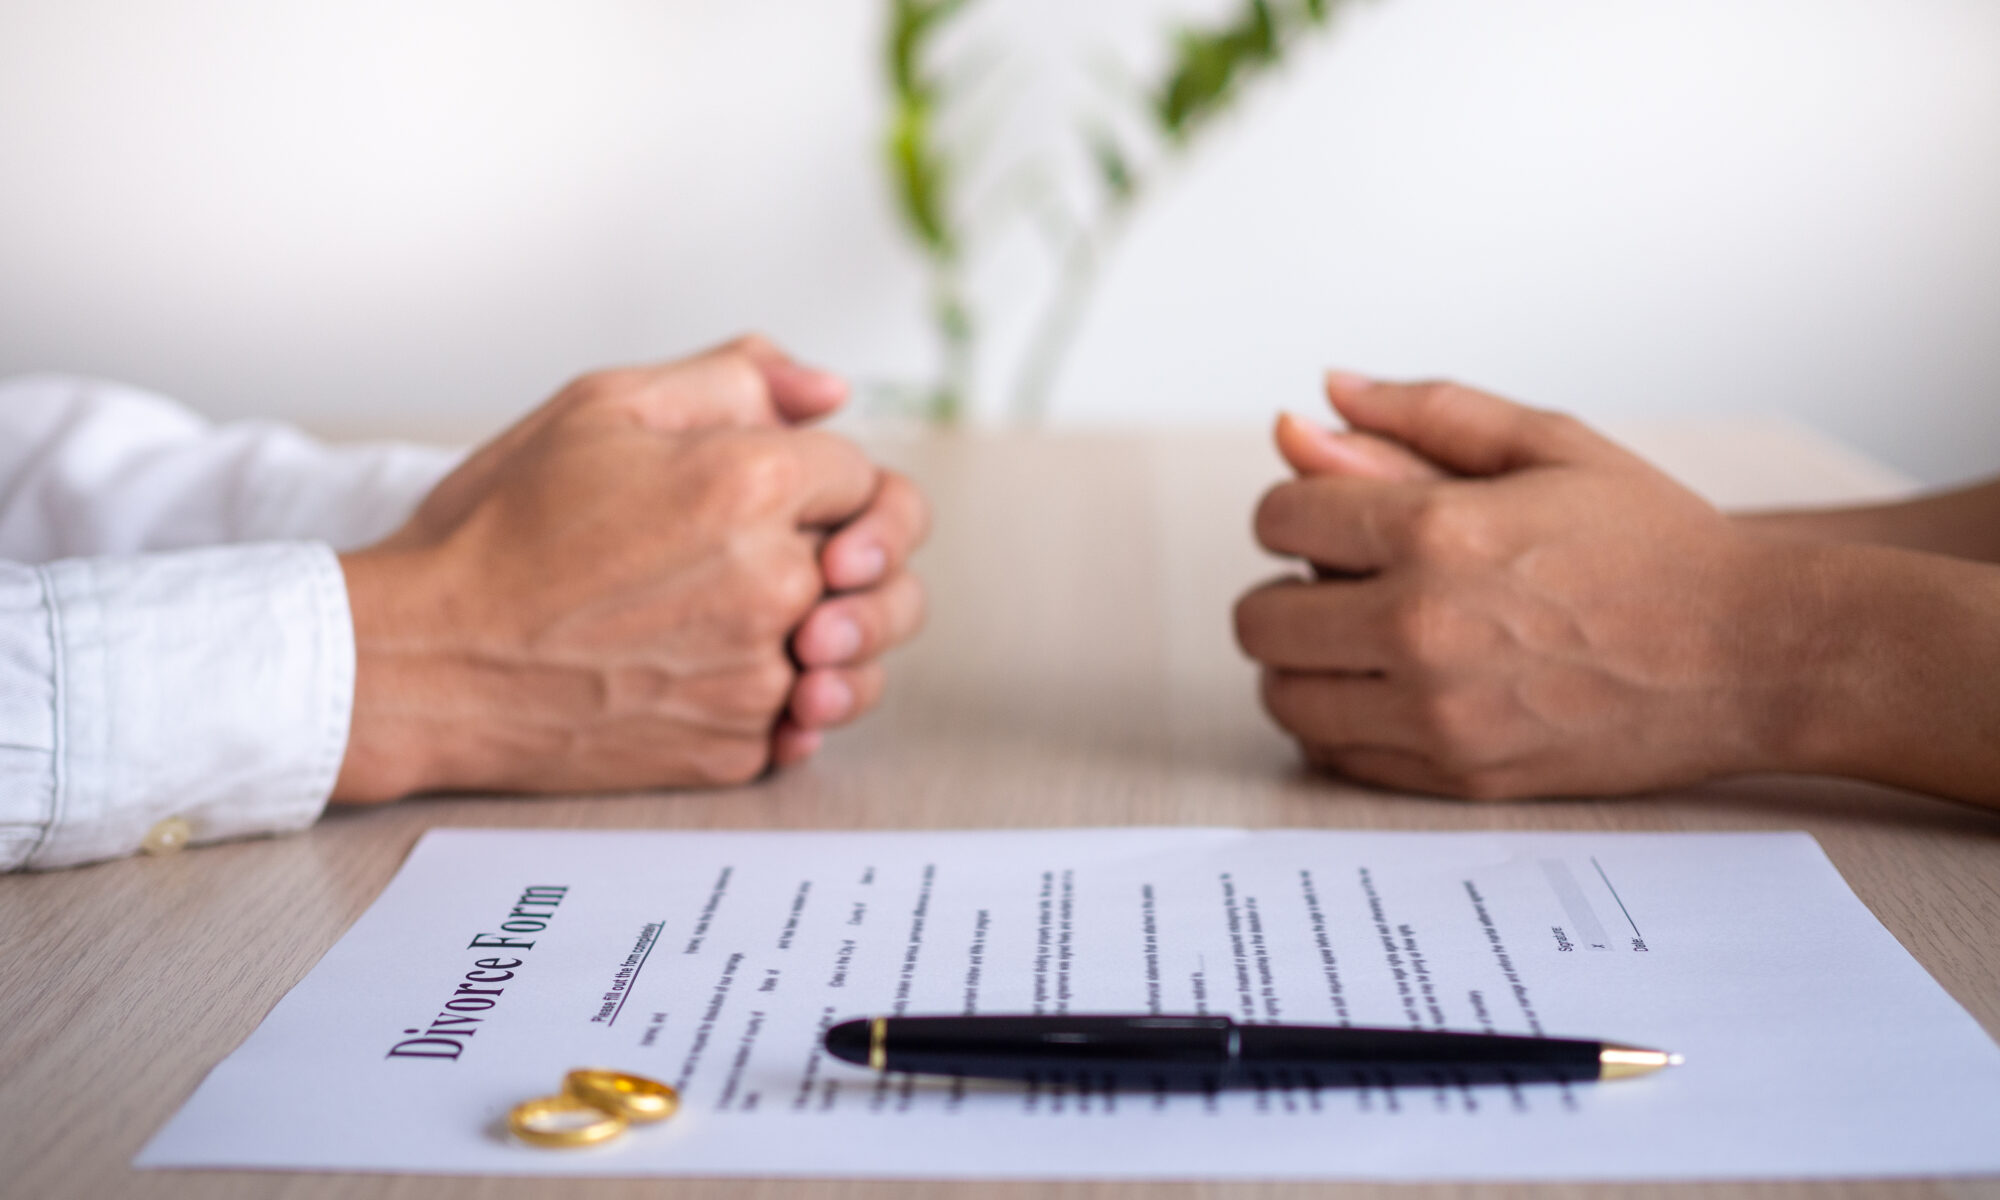 The hands of the wife and husband with the order of divorce, dissolution, cancellation of marriage, legal separation documents, divorce filings or pre-marital agreements prepared by a lawyer.